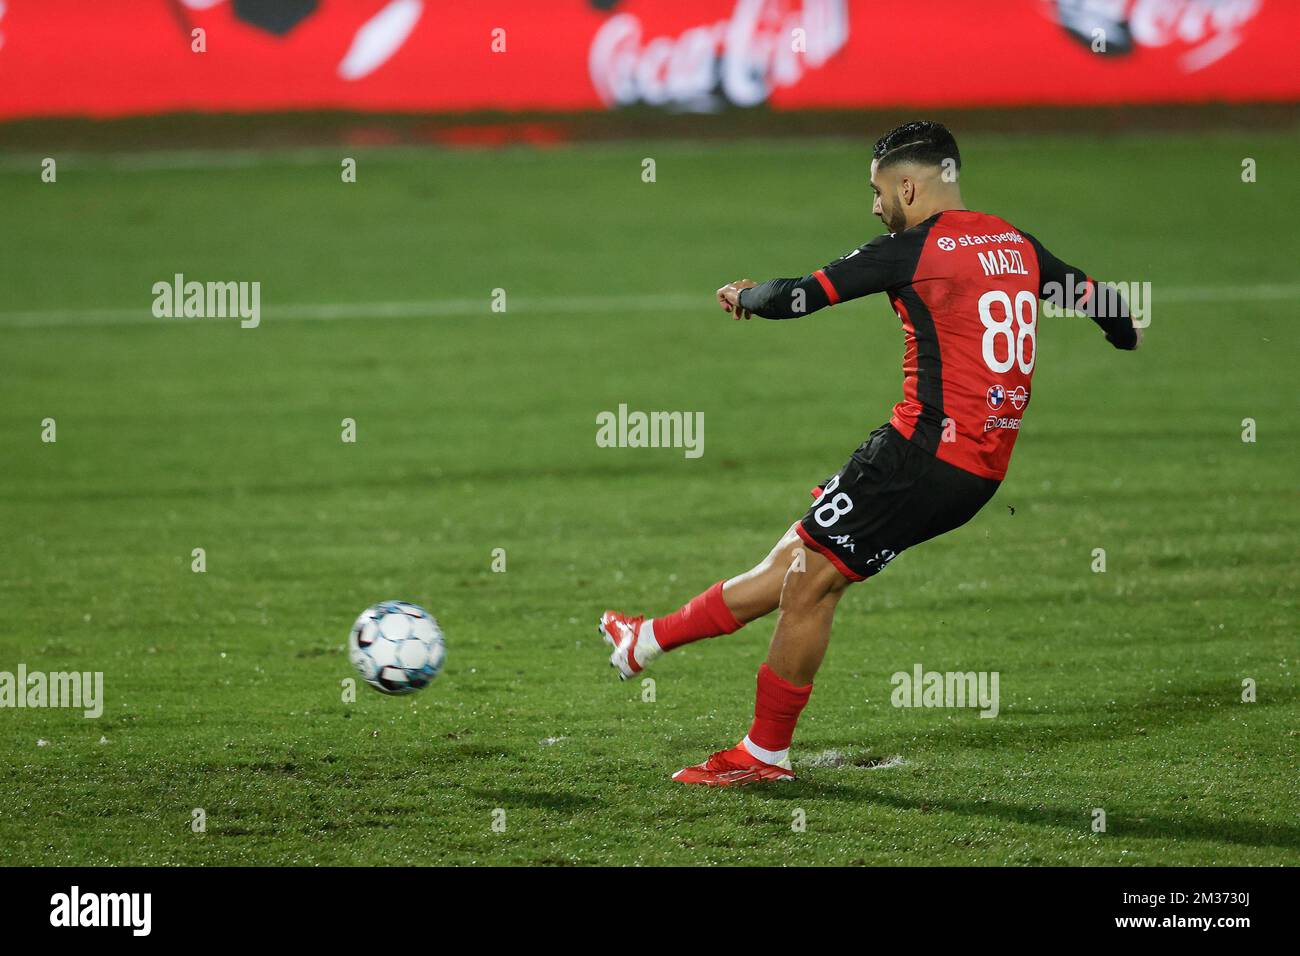 Seraing's Youssef Maziz scores from penalty during a soccer game between  RFC Seraing United and RSC Anderlecht, Tuesday 30 November 2021 in Seraing,  in the round of 16 of the 'Croky Cup'